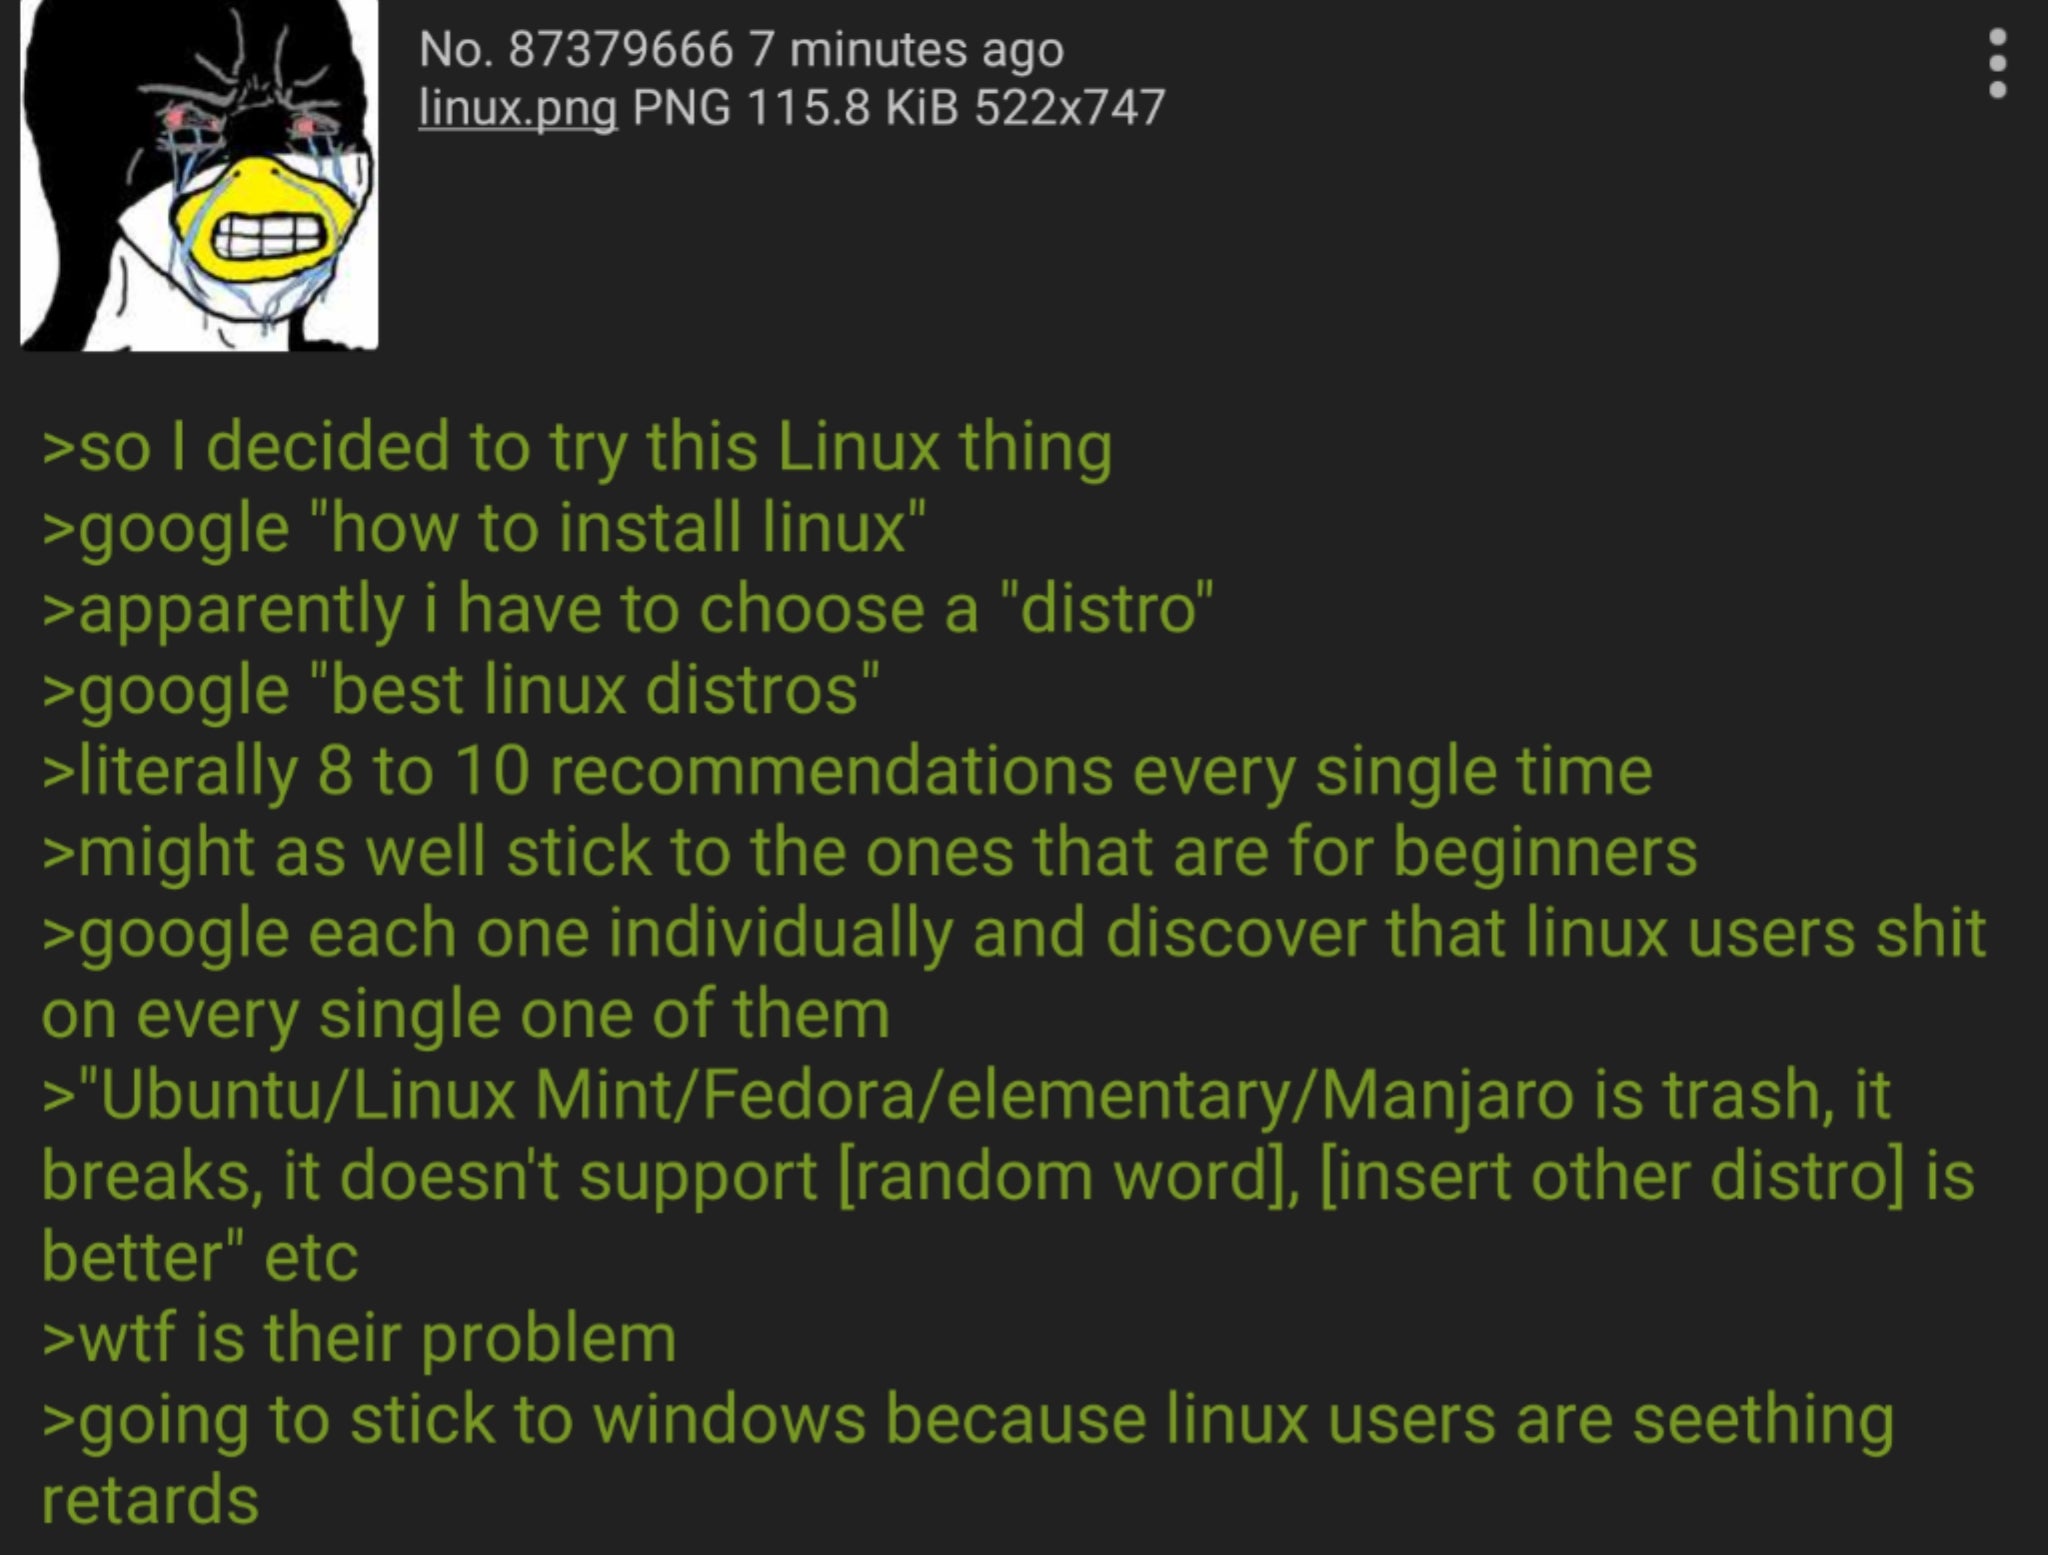 Anon tires to download Linux